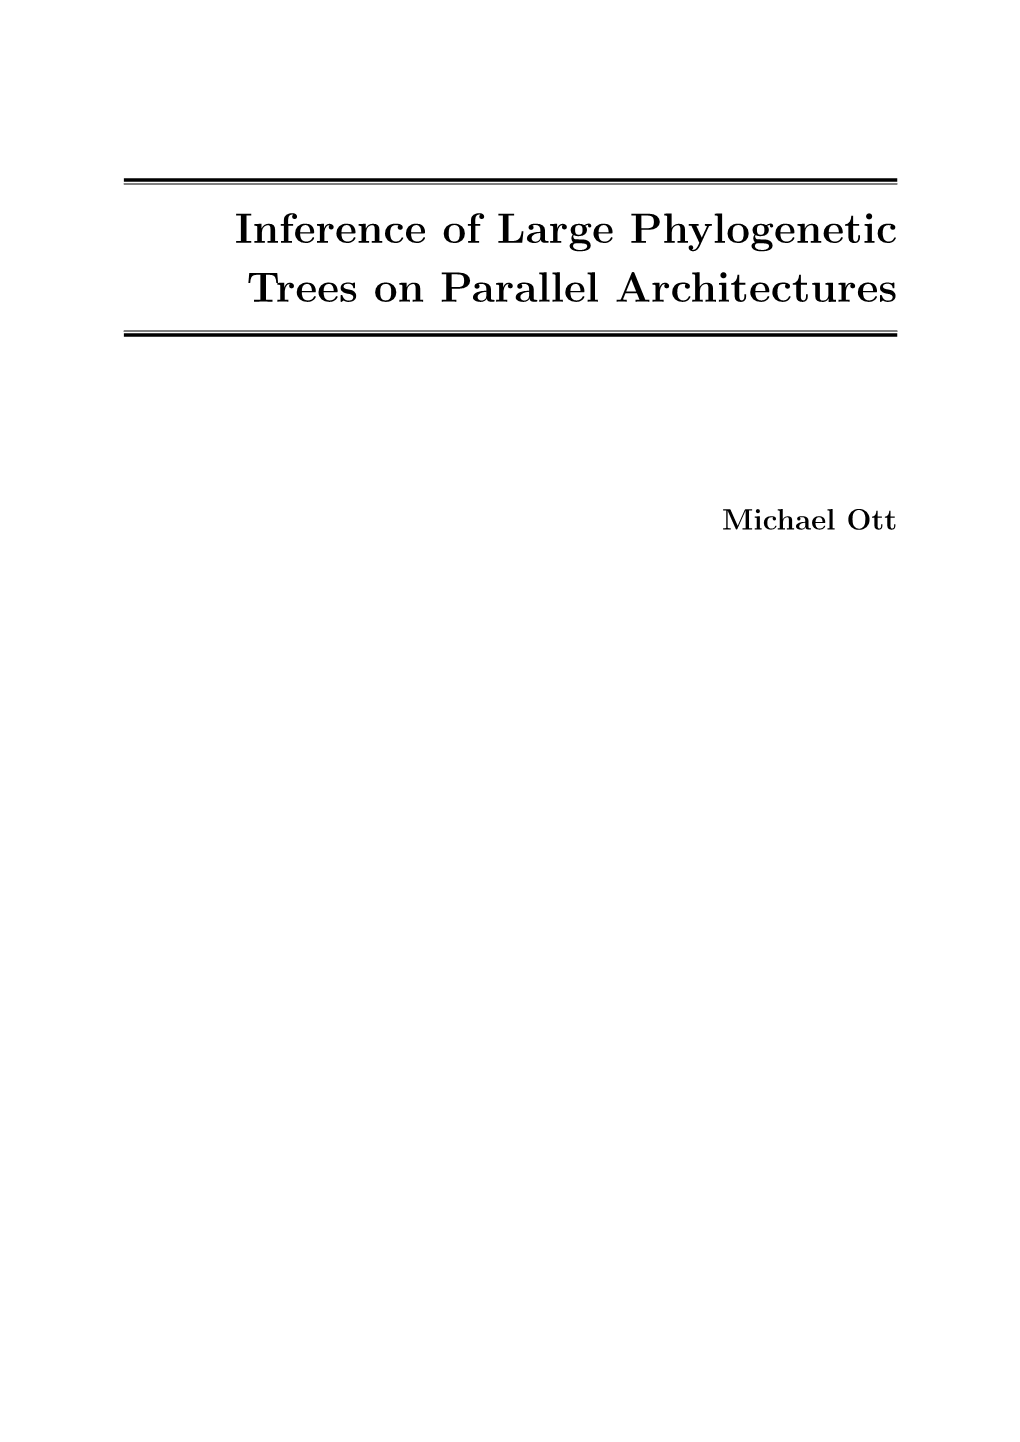 Inference of Large Phylogenetic Trees on Parallel Architectures